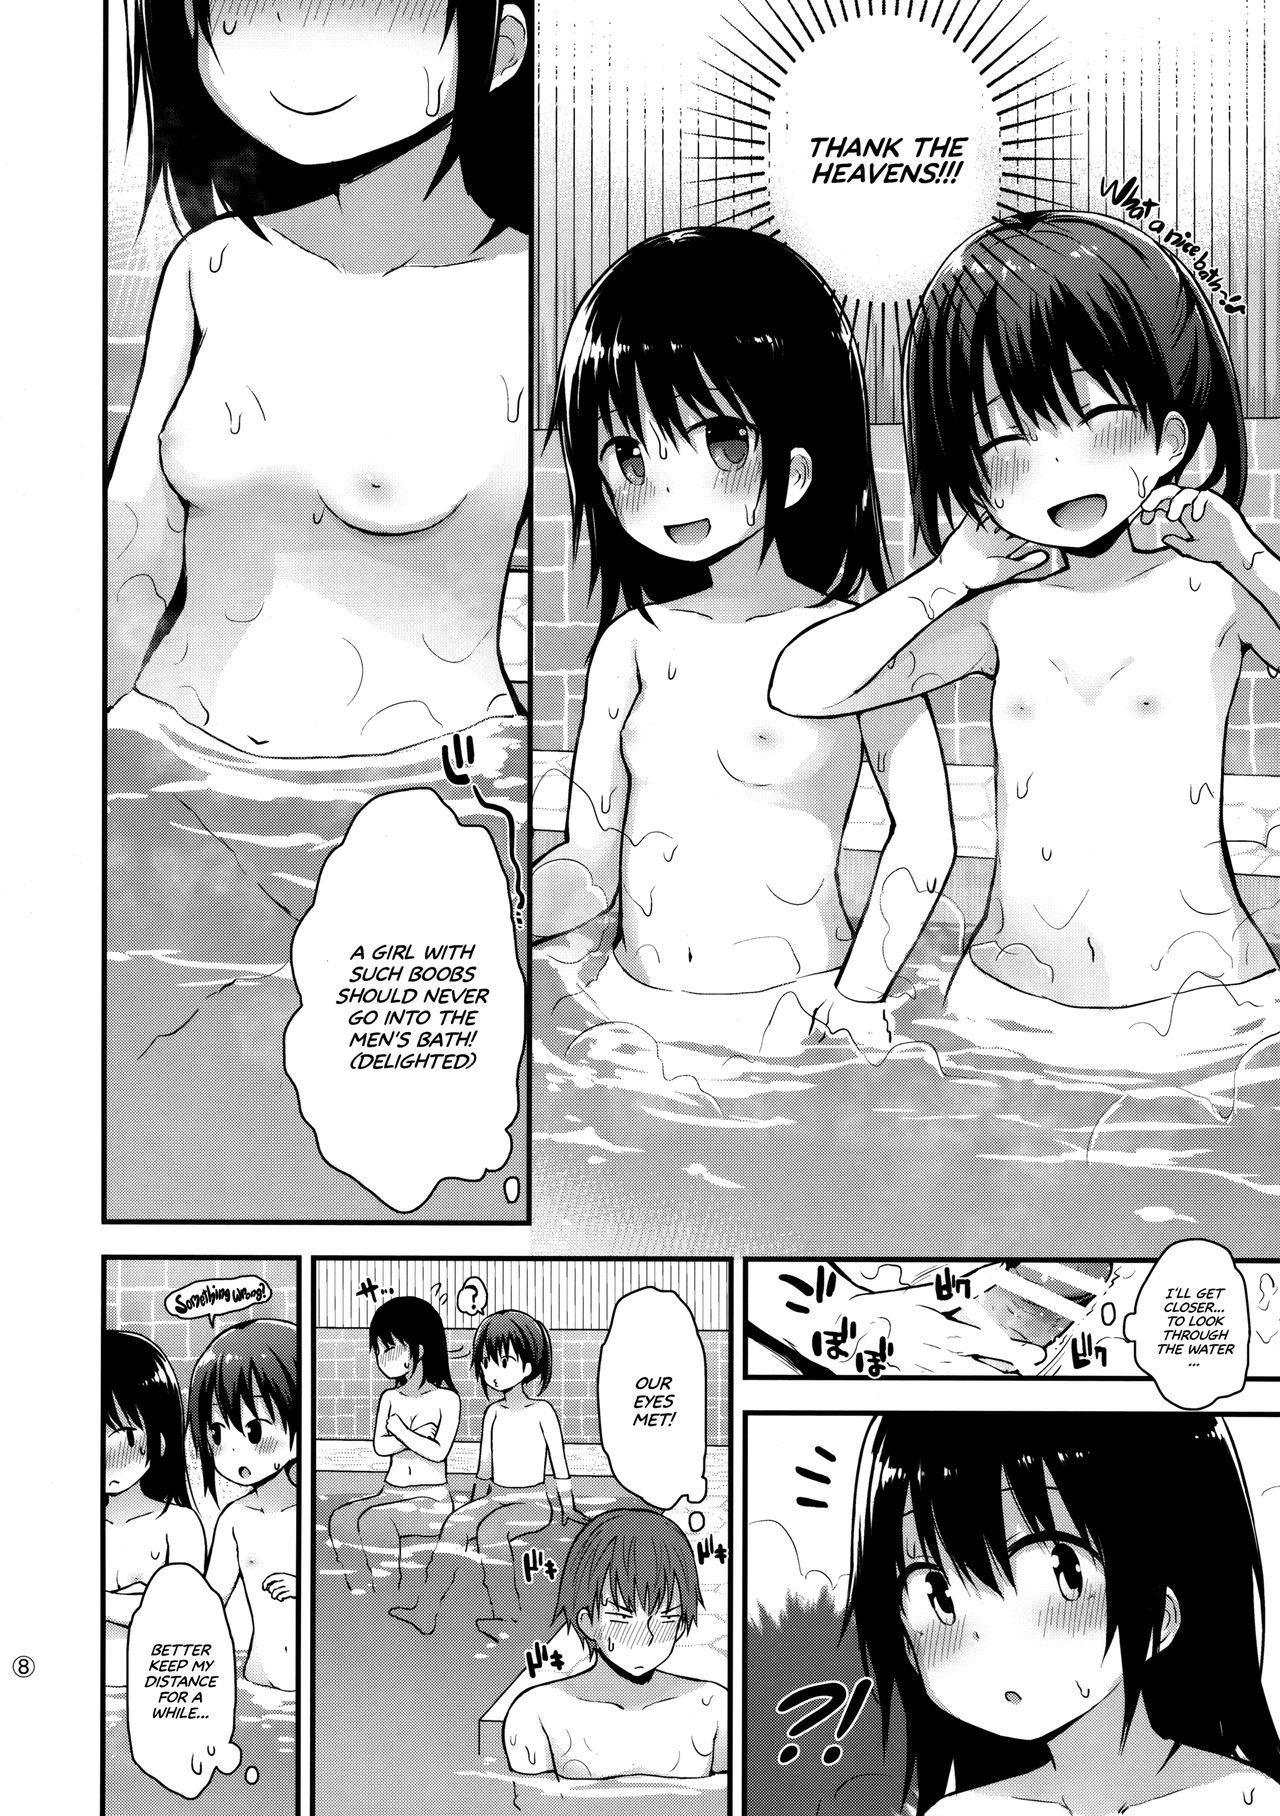 Chupada Onnanoko datte Otokoyu ni Hairitai | They may just be little girls, but they still want to enter the men's bath! - Original Omegle - Page 7